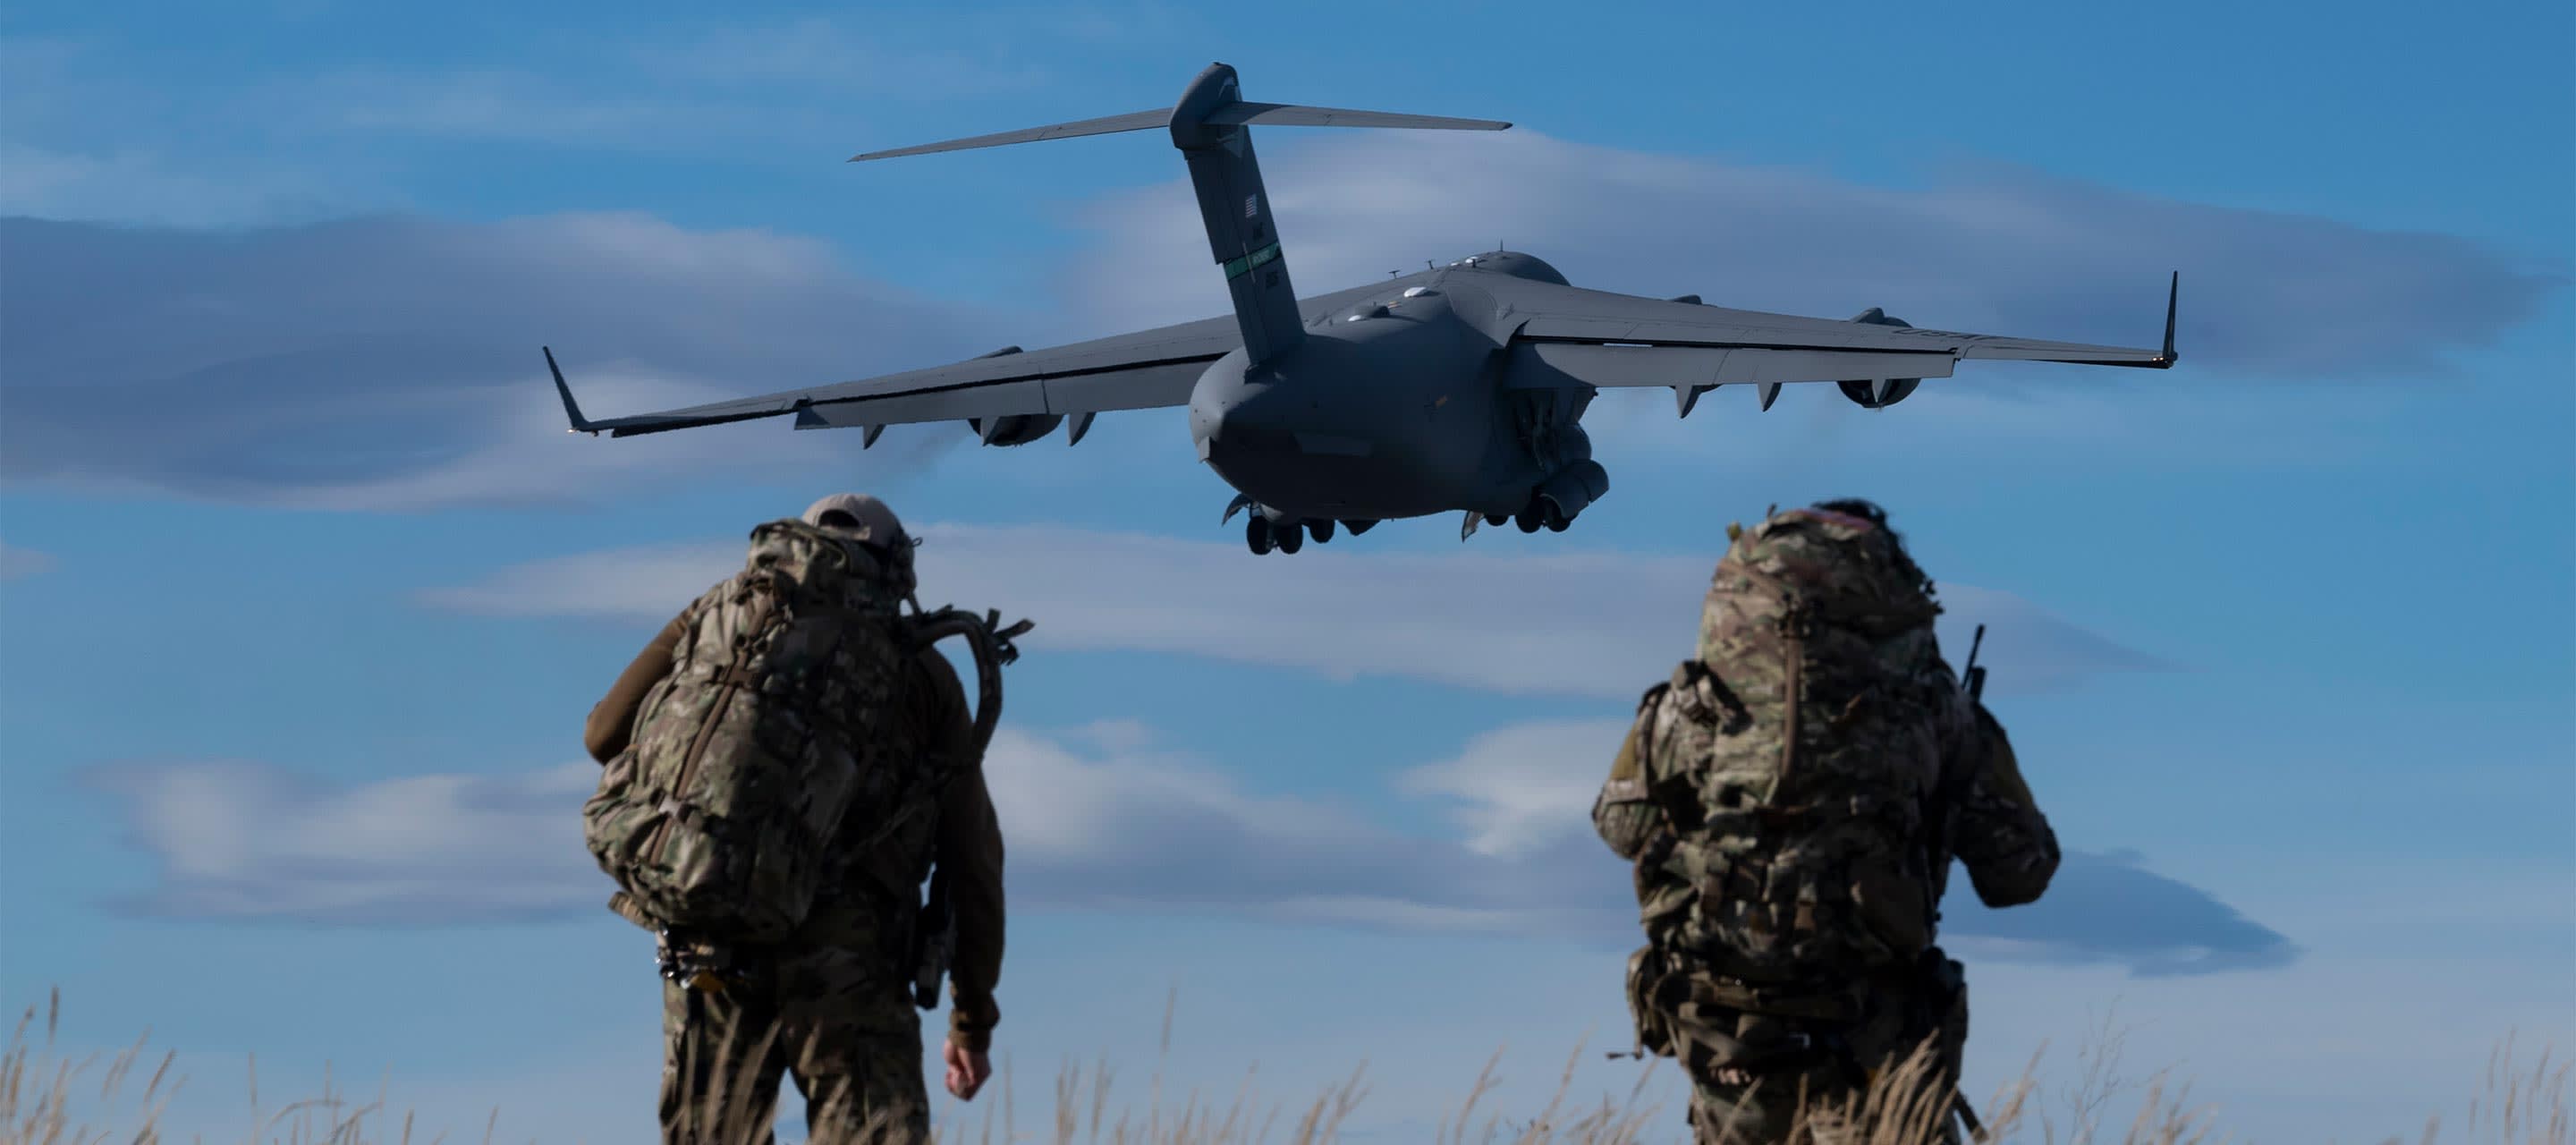 image shows two soldiers moving towards a plane overhead